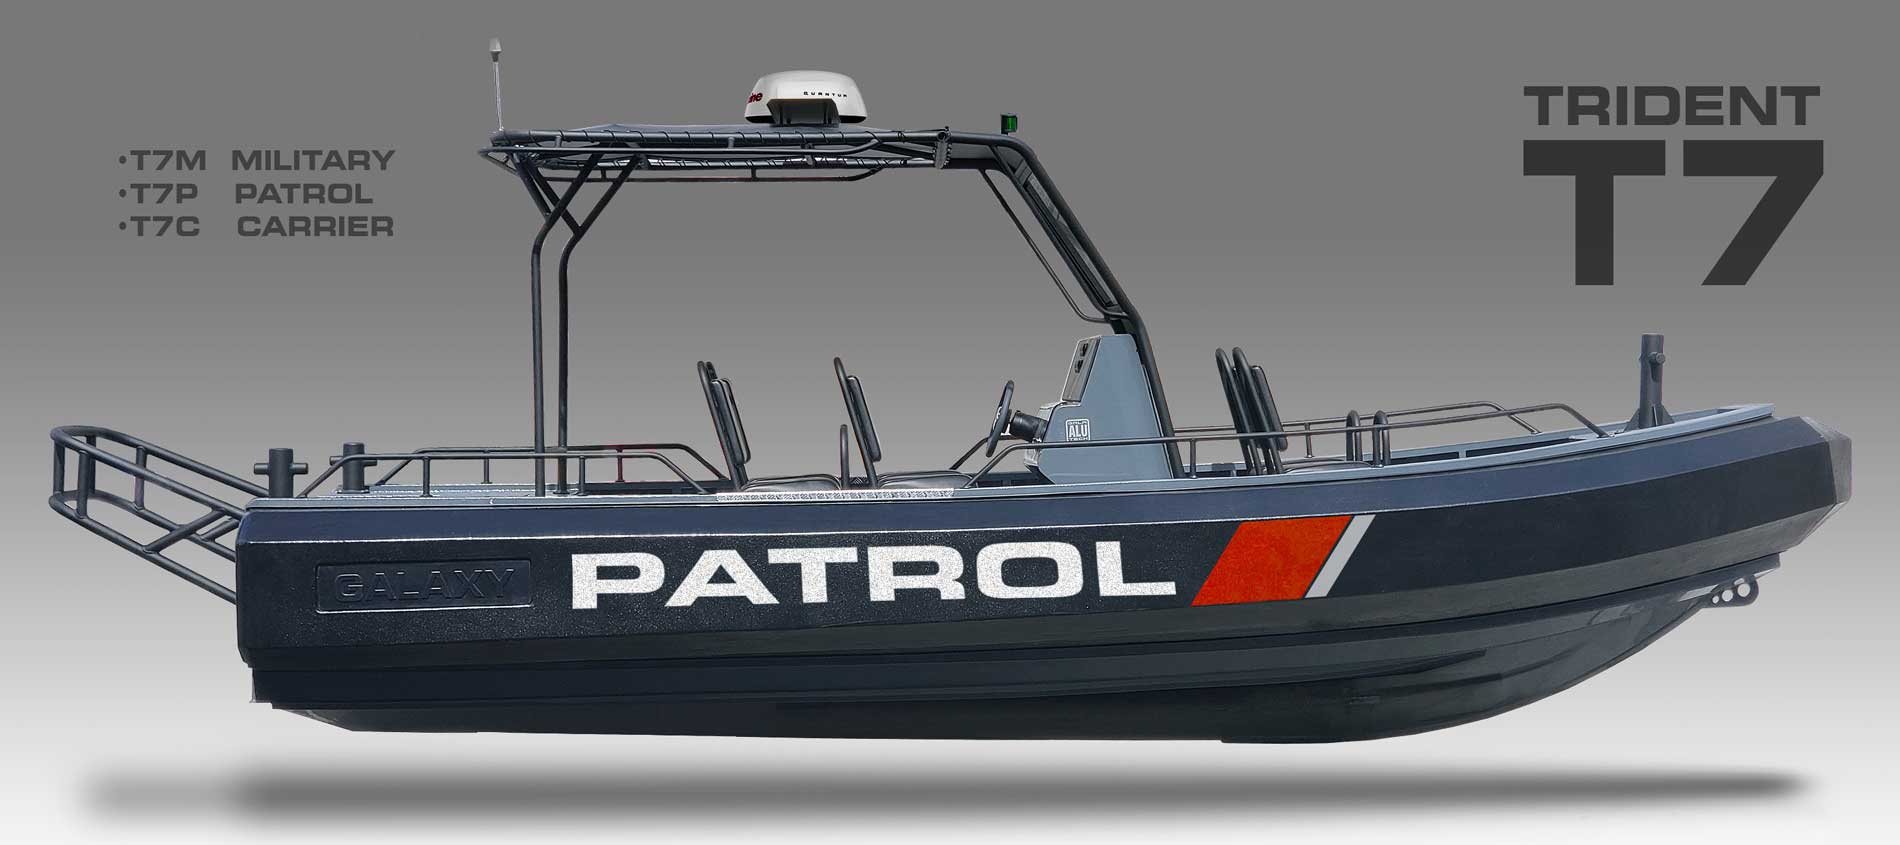 Rigid inflatable boat RIB that is 21’4″ long, meets the toughest requirements for operation boats, law enforcement & patrol, heavy duty military & commercial use.